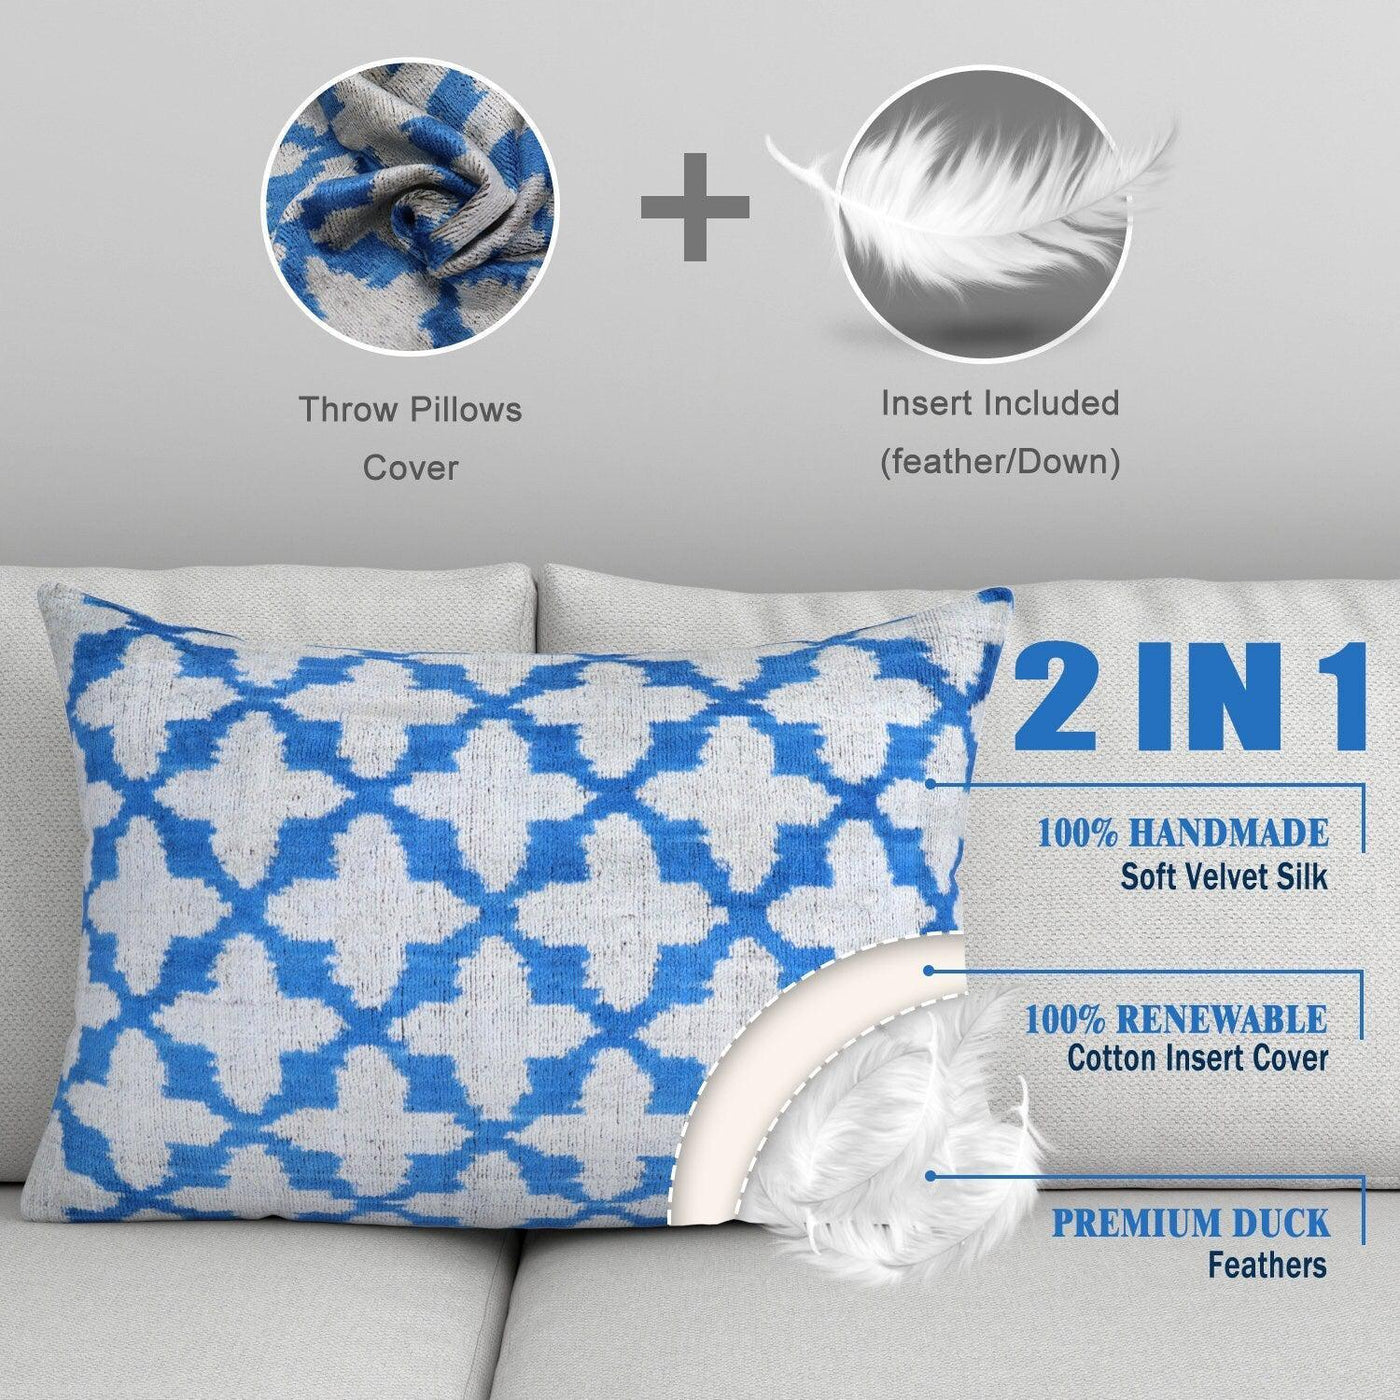 Canvello Blue And White Pillows For Couch - 16x24 in